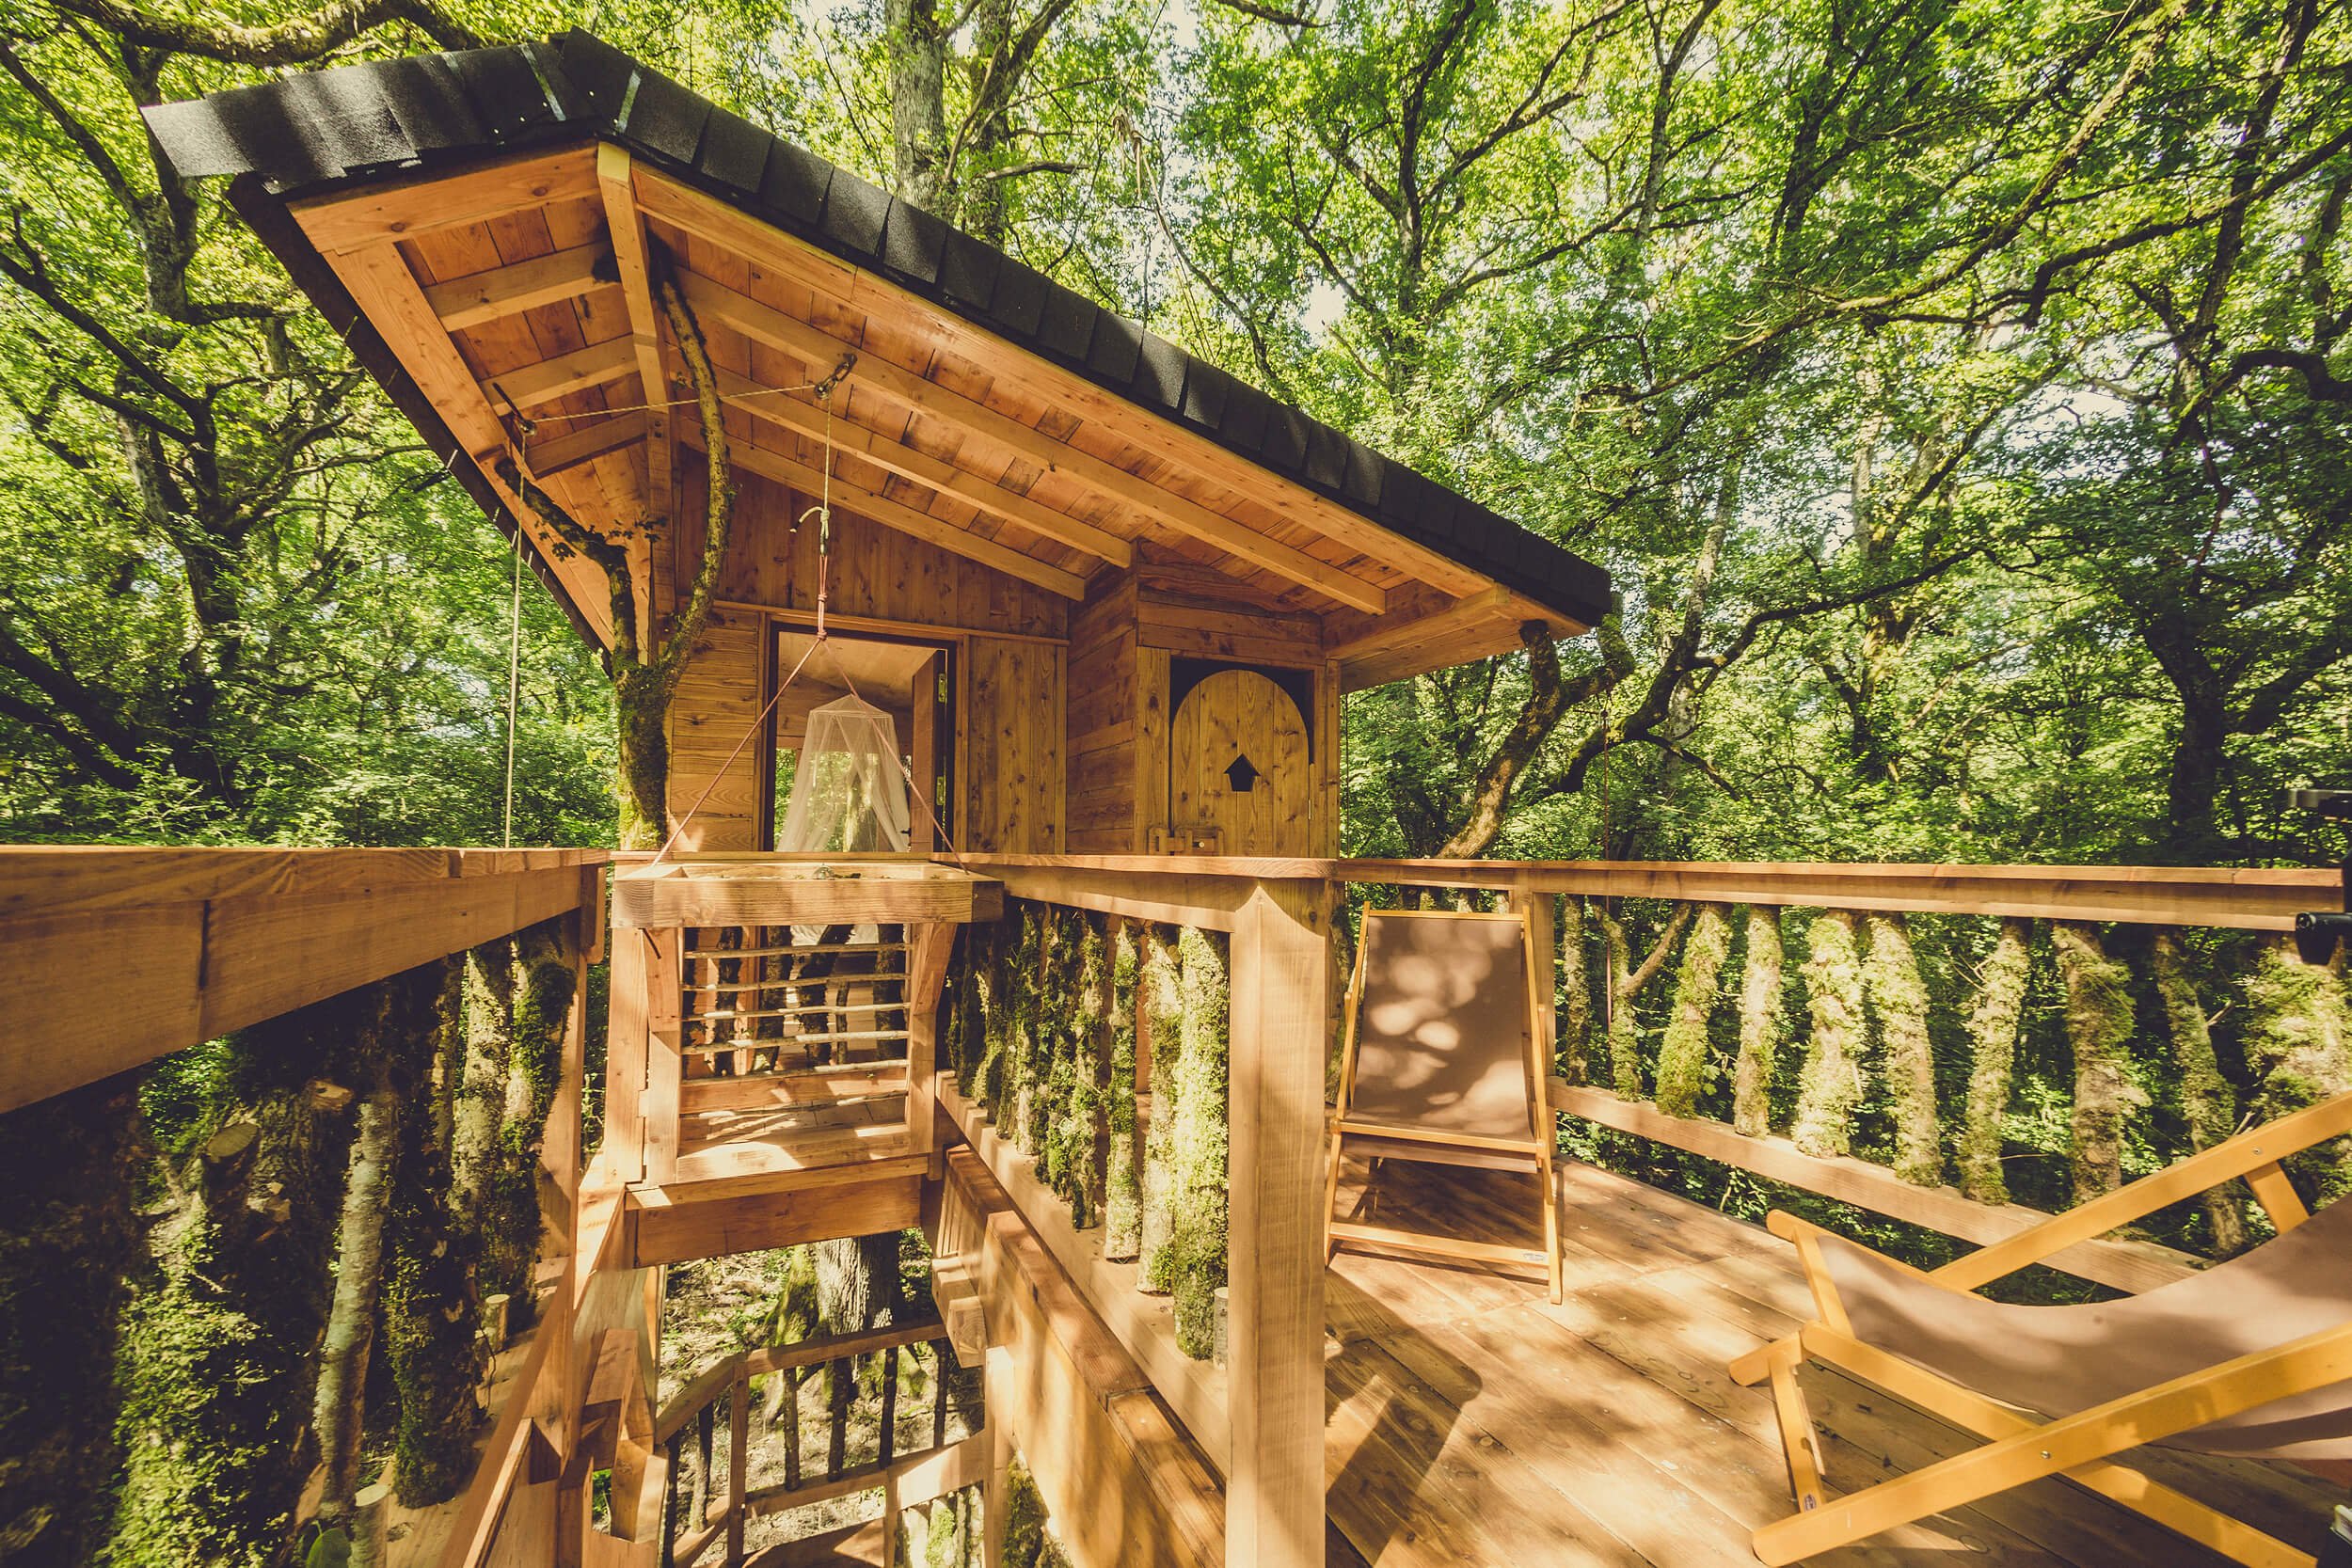 Escape to the forest- a look inside Basoa Suites' treehouses by MuruStudios advertising photographers in Madrid Barcelona Pamplona Spain 07.jpg